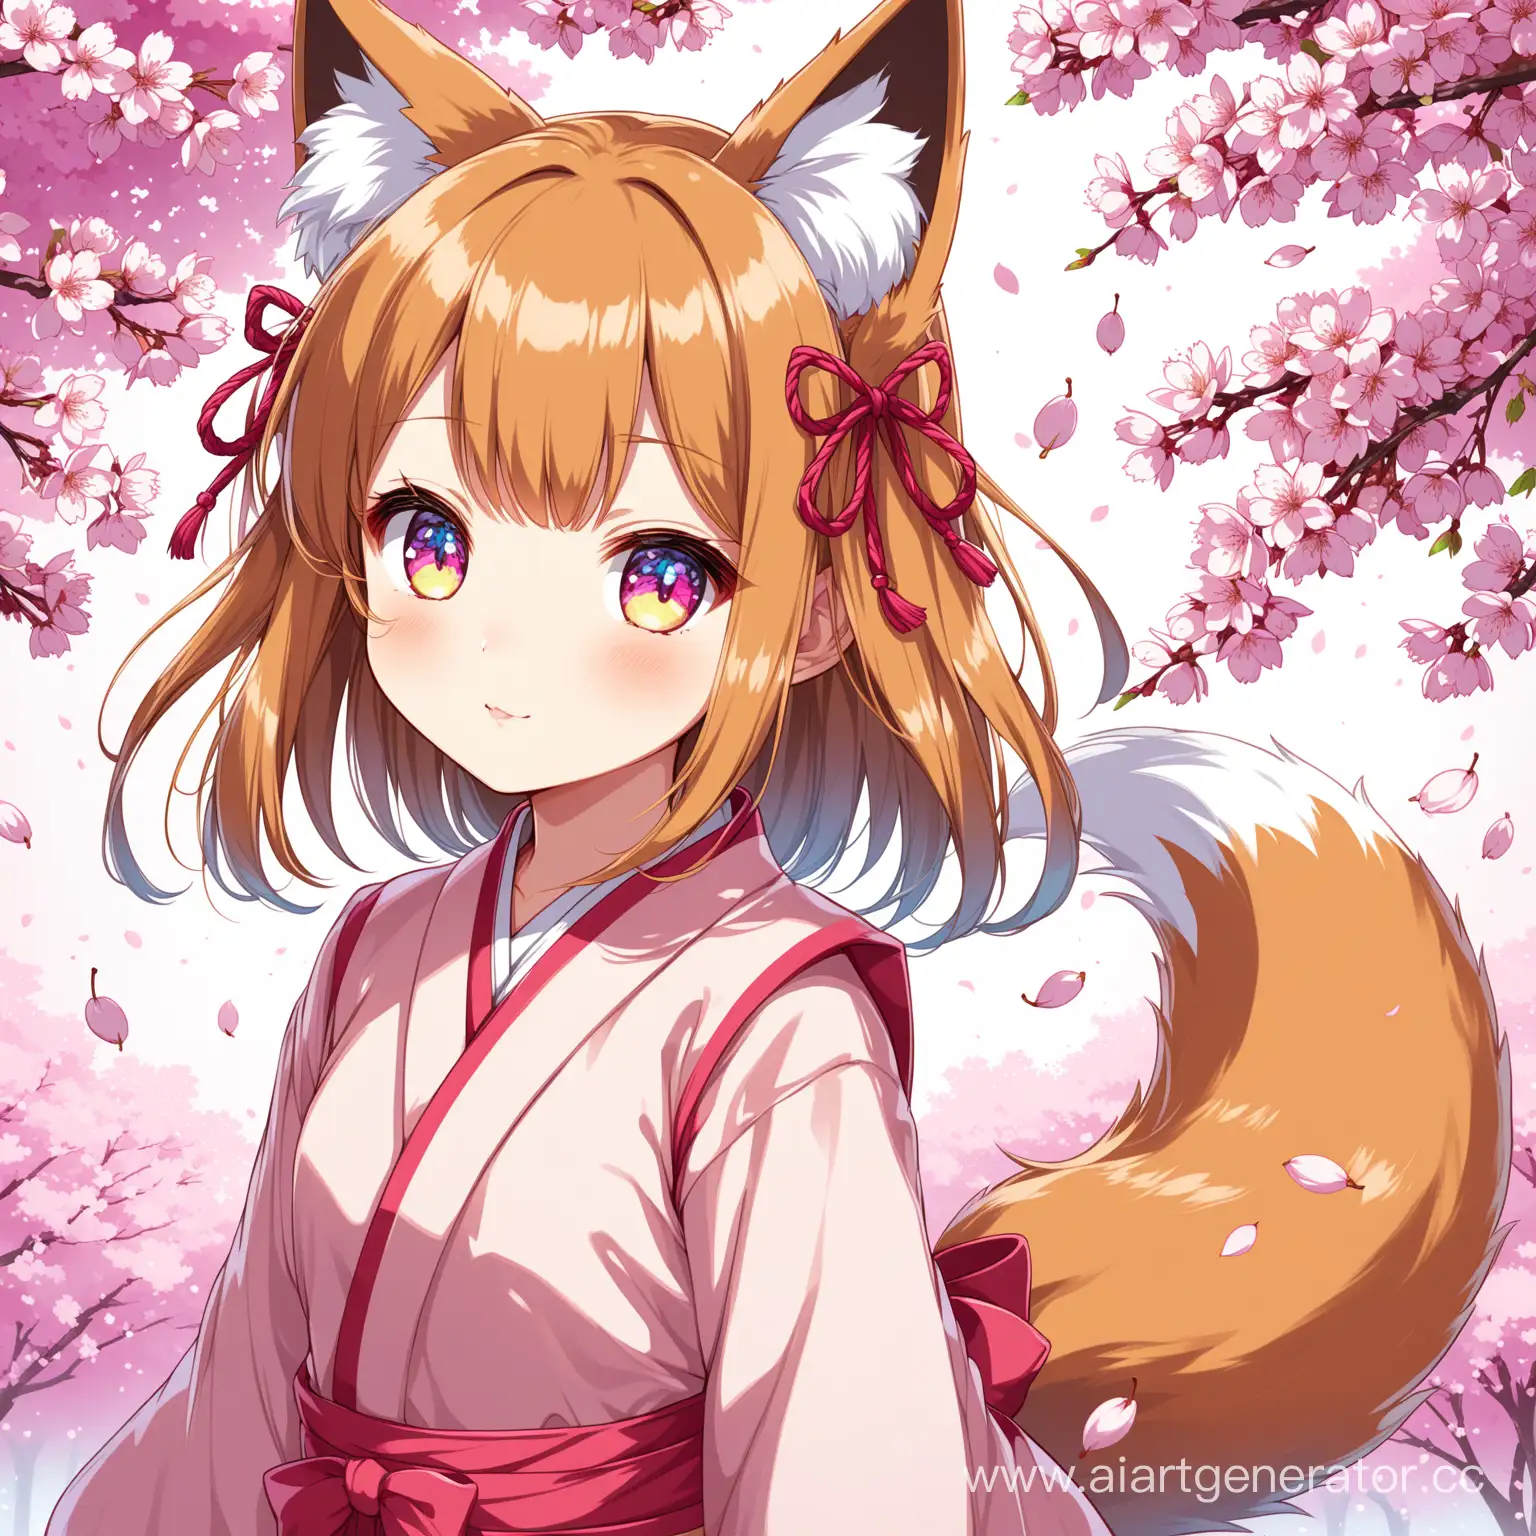 Loli-Girl-with-Fox-Ears-and-Multicolored-Eyes-Amid-Cherry-Blossoms